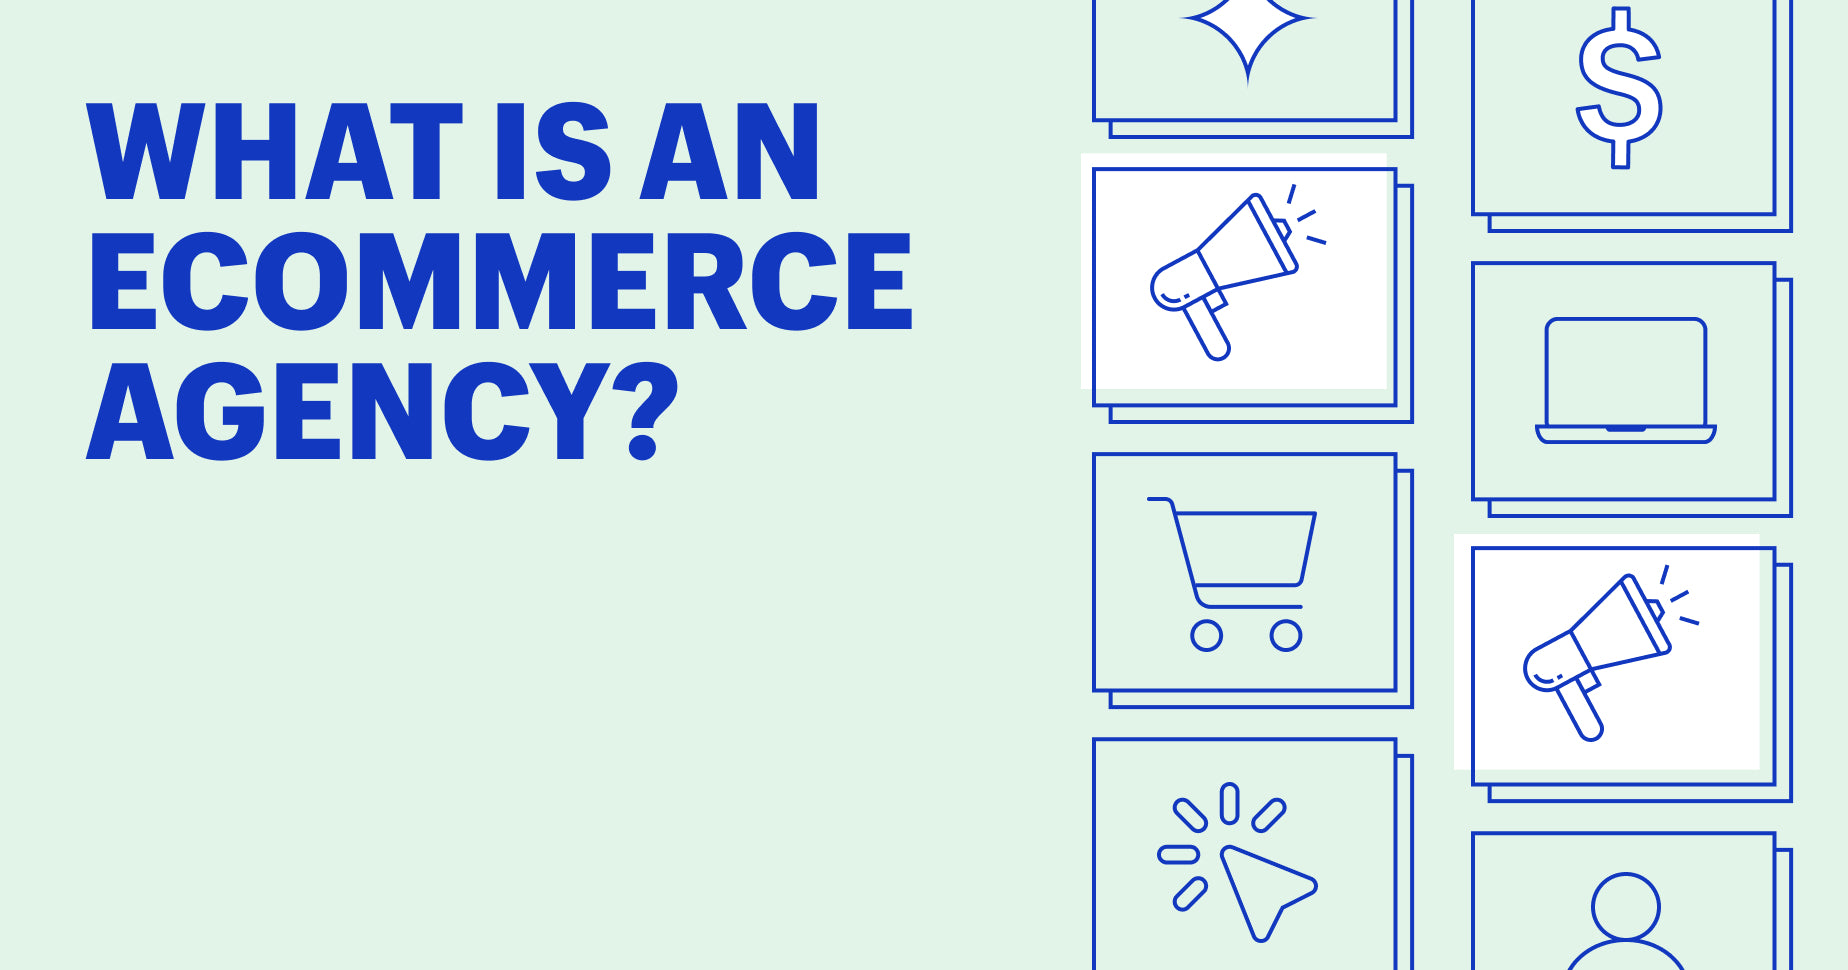 Ecommerce SEO Agency for Small Businesses